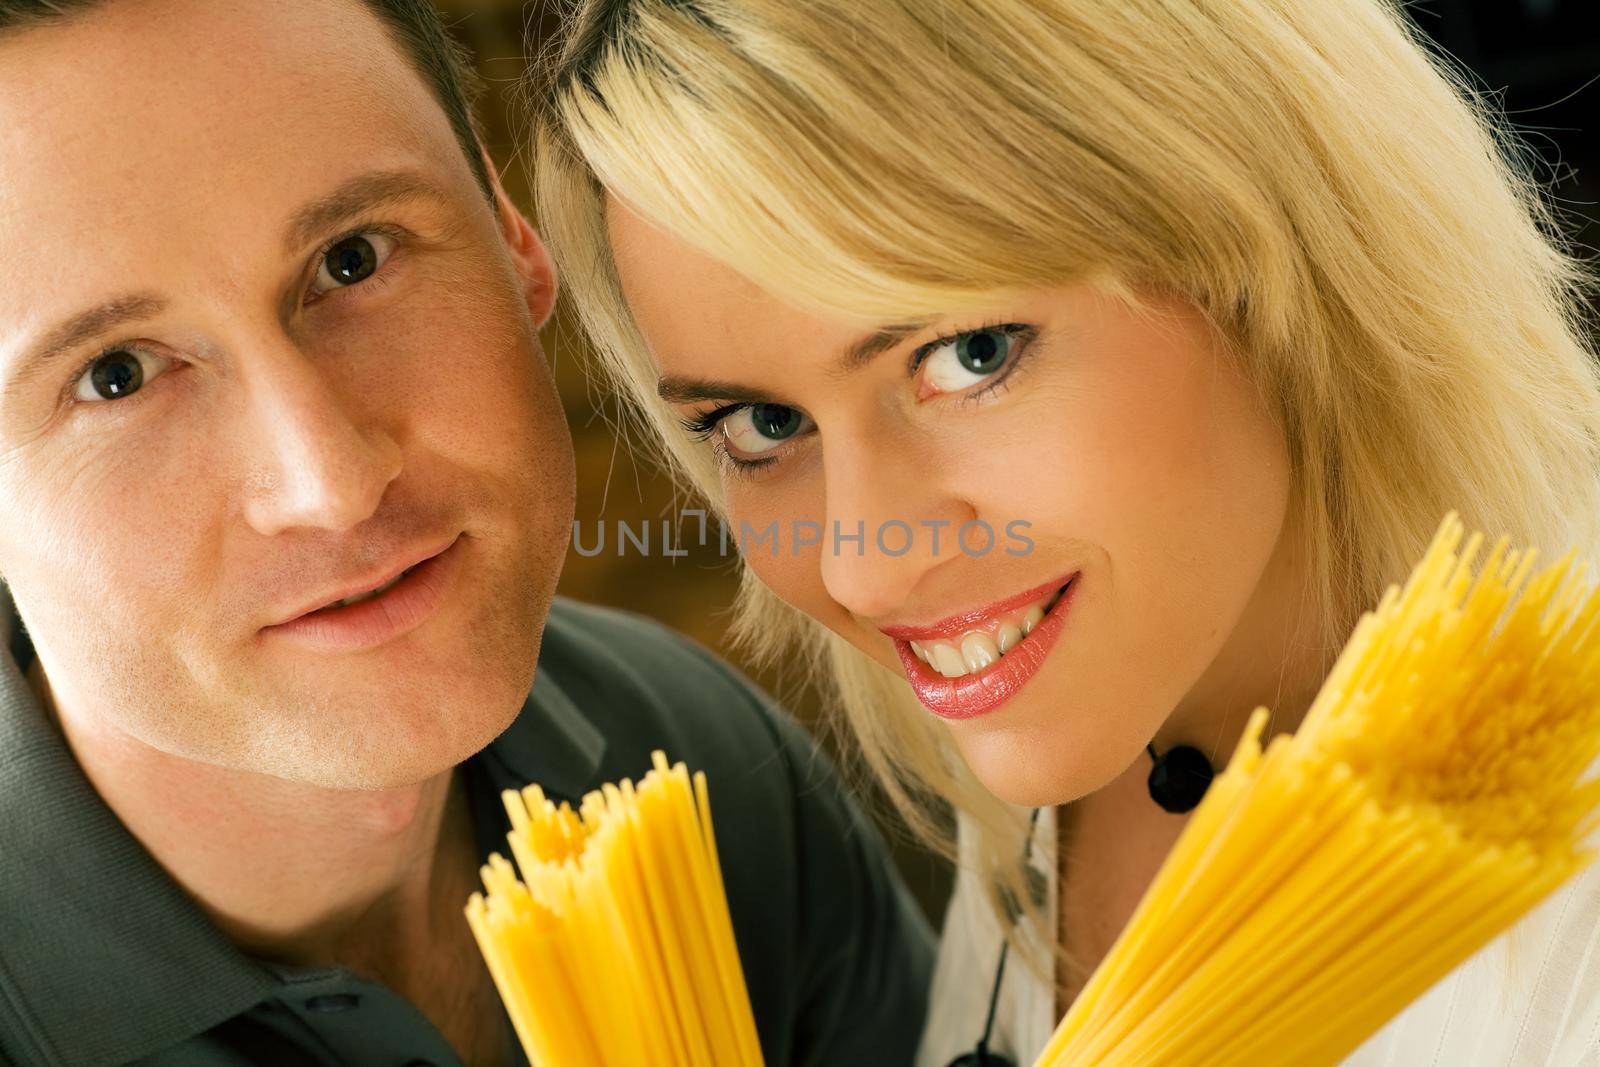 A couple with uncooked spaghetti (going to prepare them presumably)